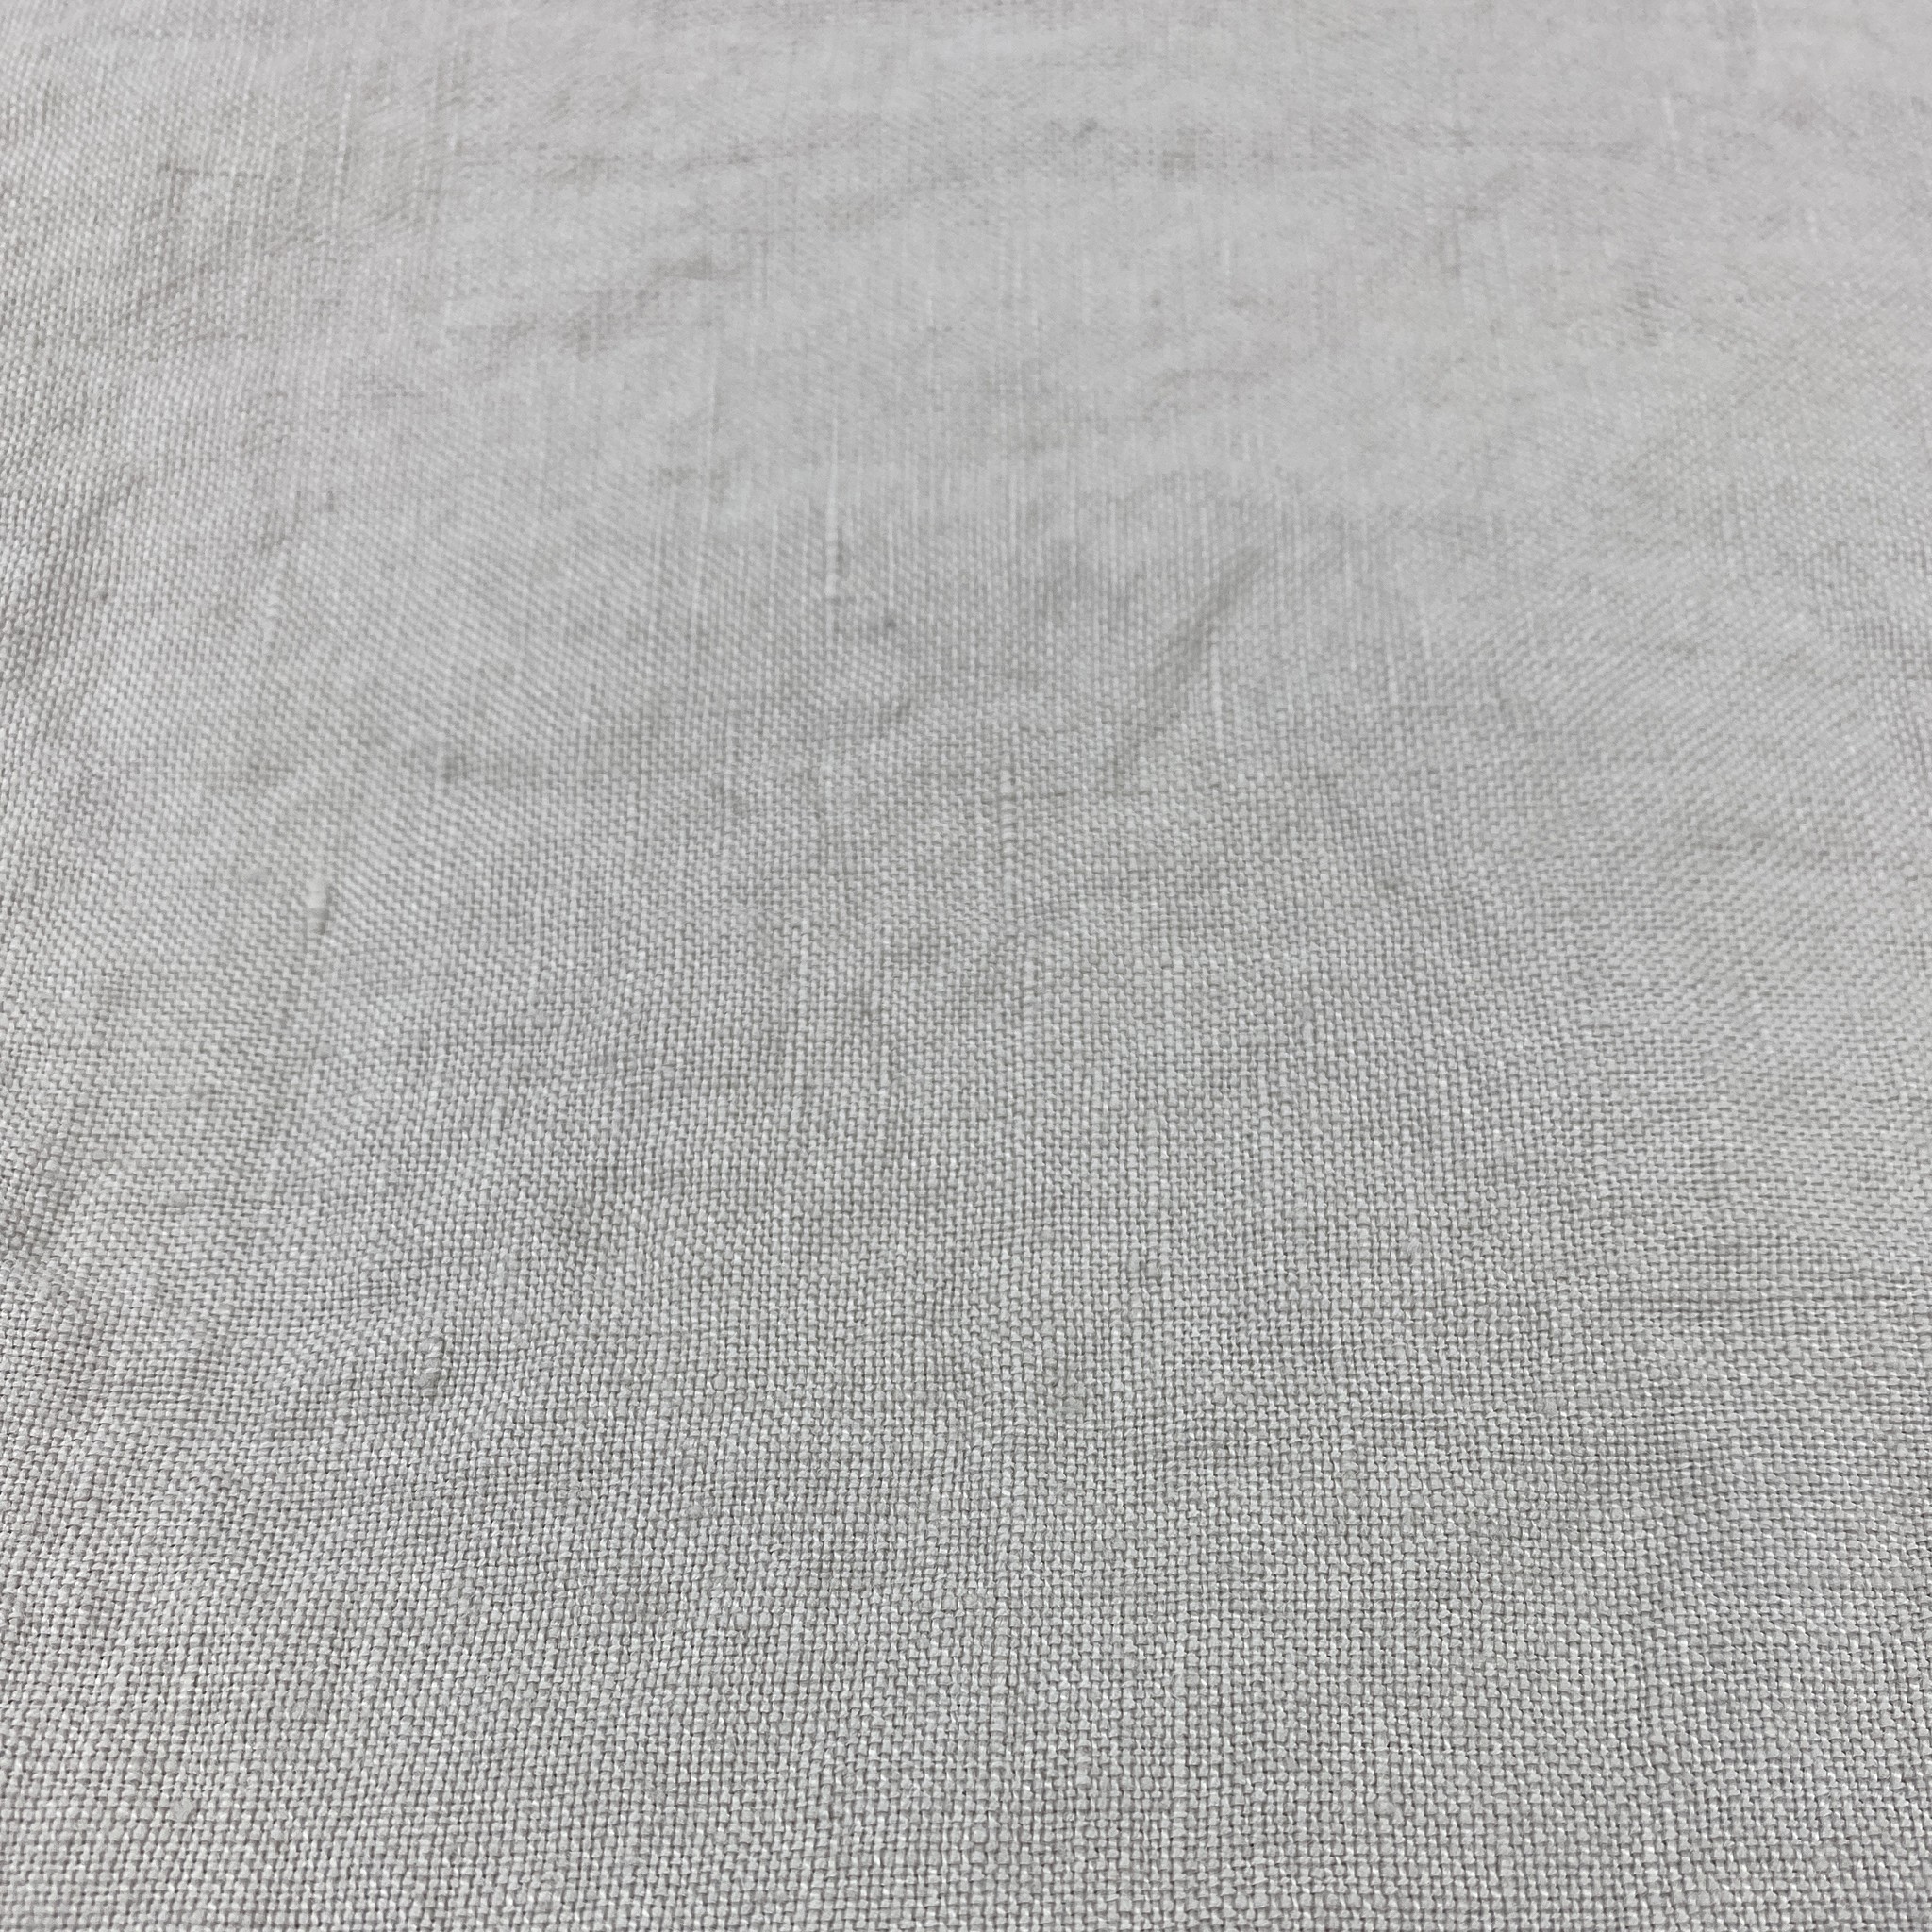 French Linen Apron Towel